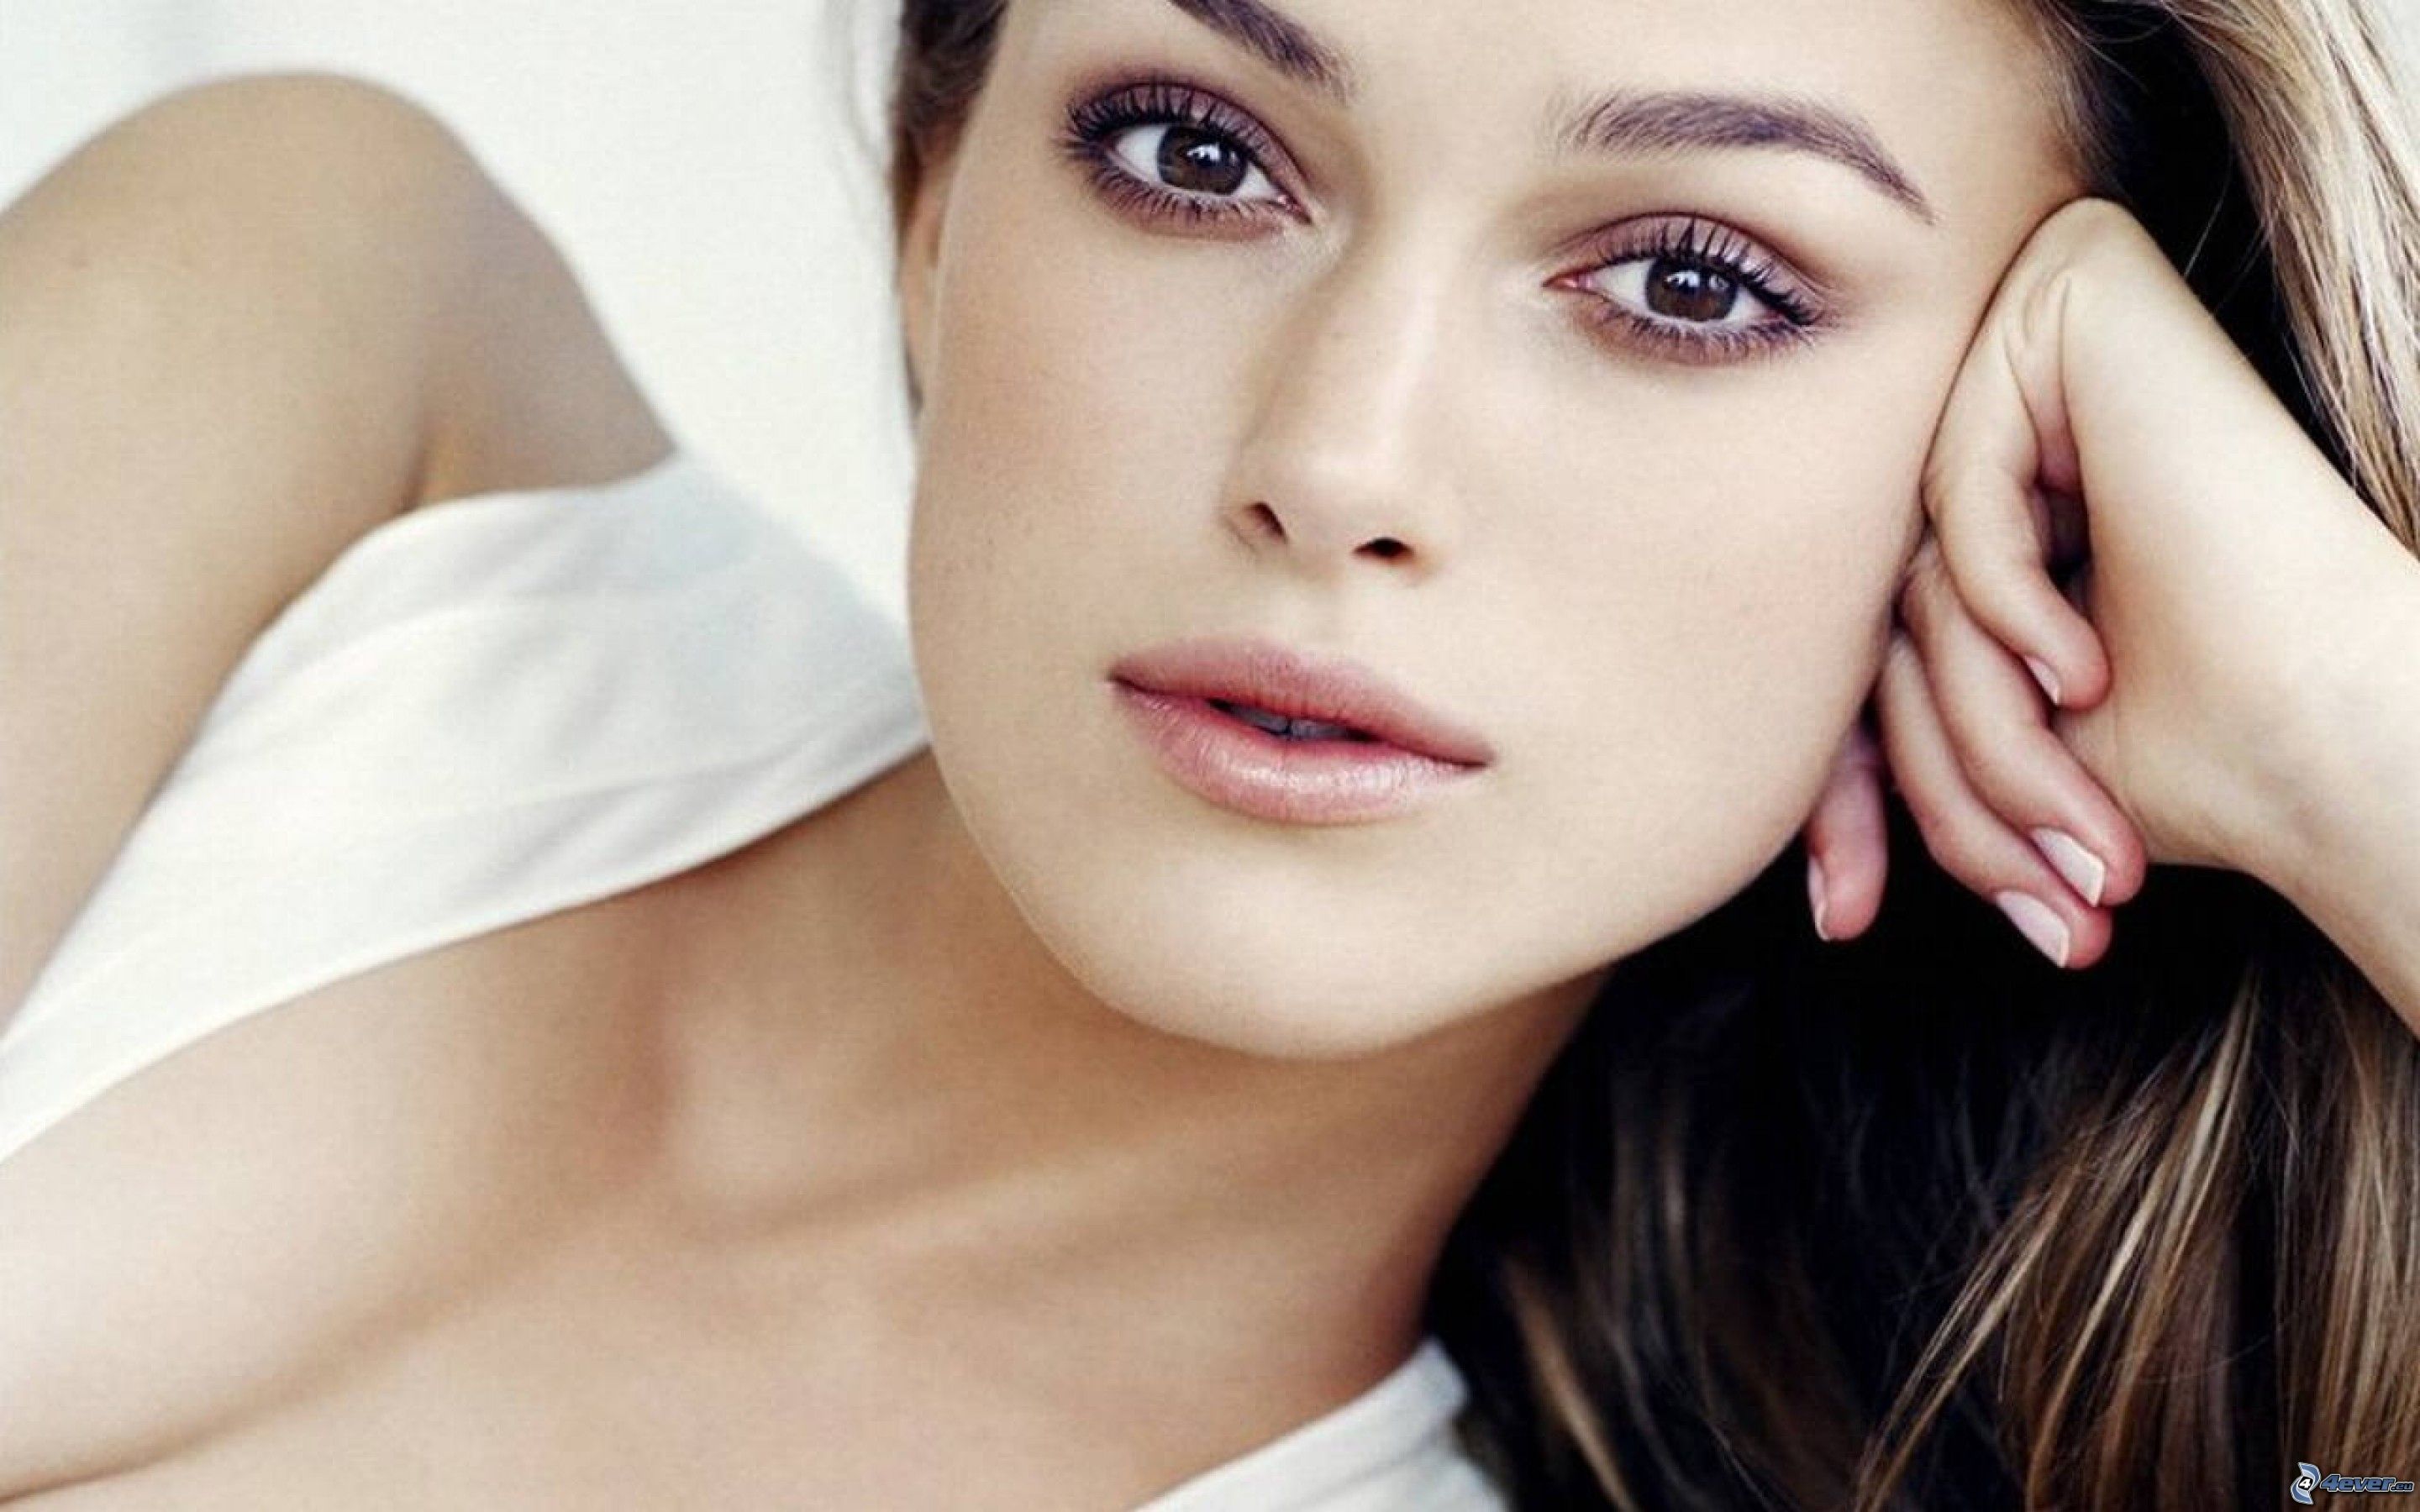 Keira Knightley Backgrounds, Compatible - PC, Mobile, Gadgets| 2880x1800 px